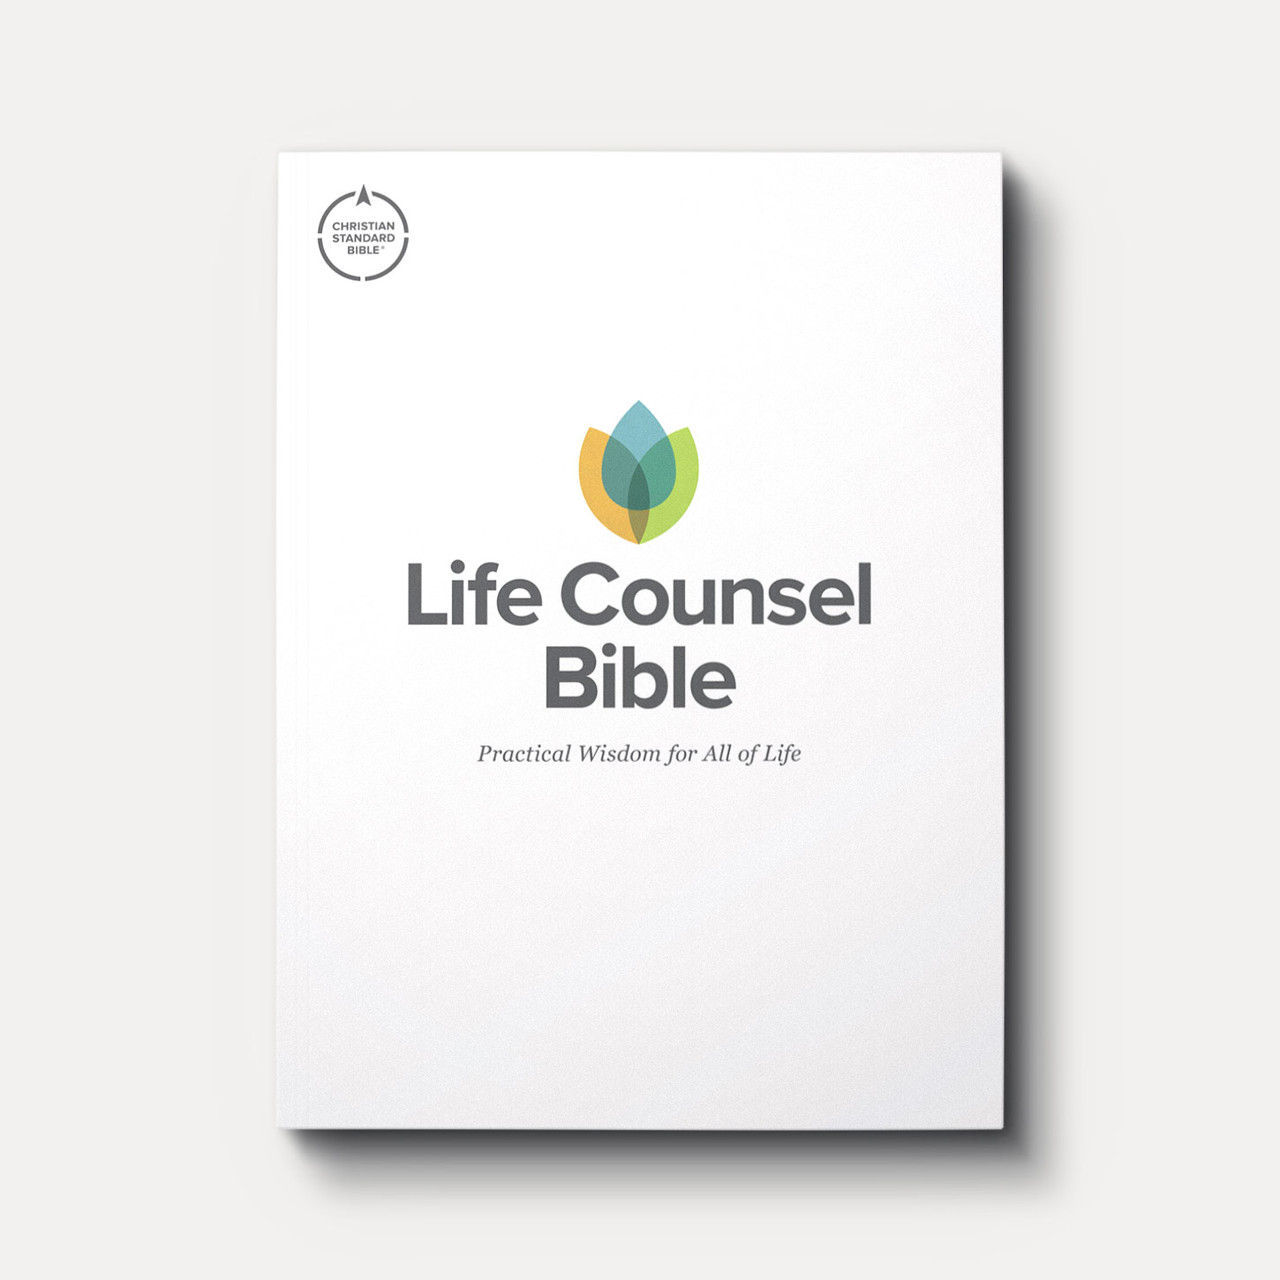 Bible:　Hardcover)　Counsel　of　Wisdom　Growth　CSB　New　All　Life　(Jacketed　Life　Practical　for　Press